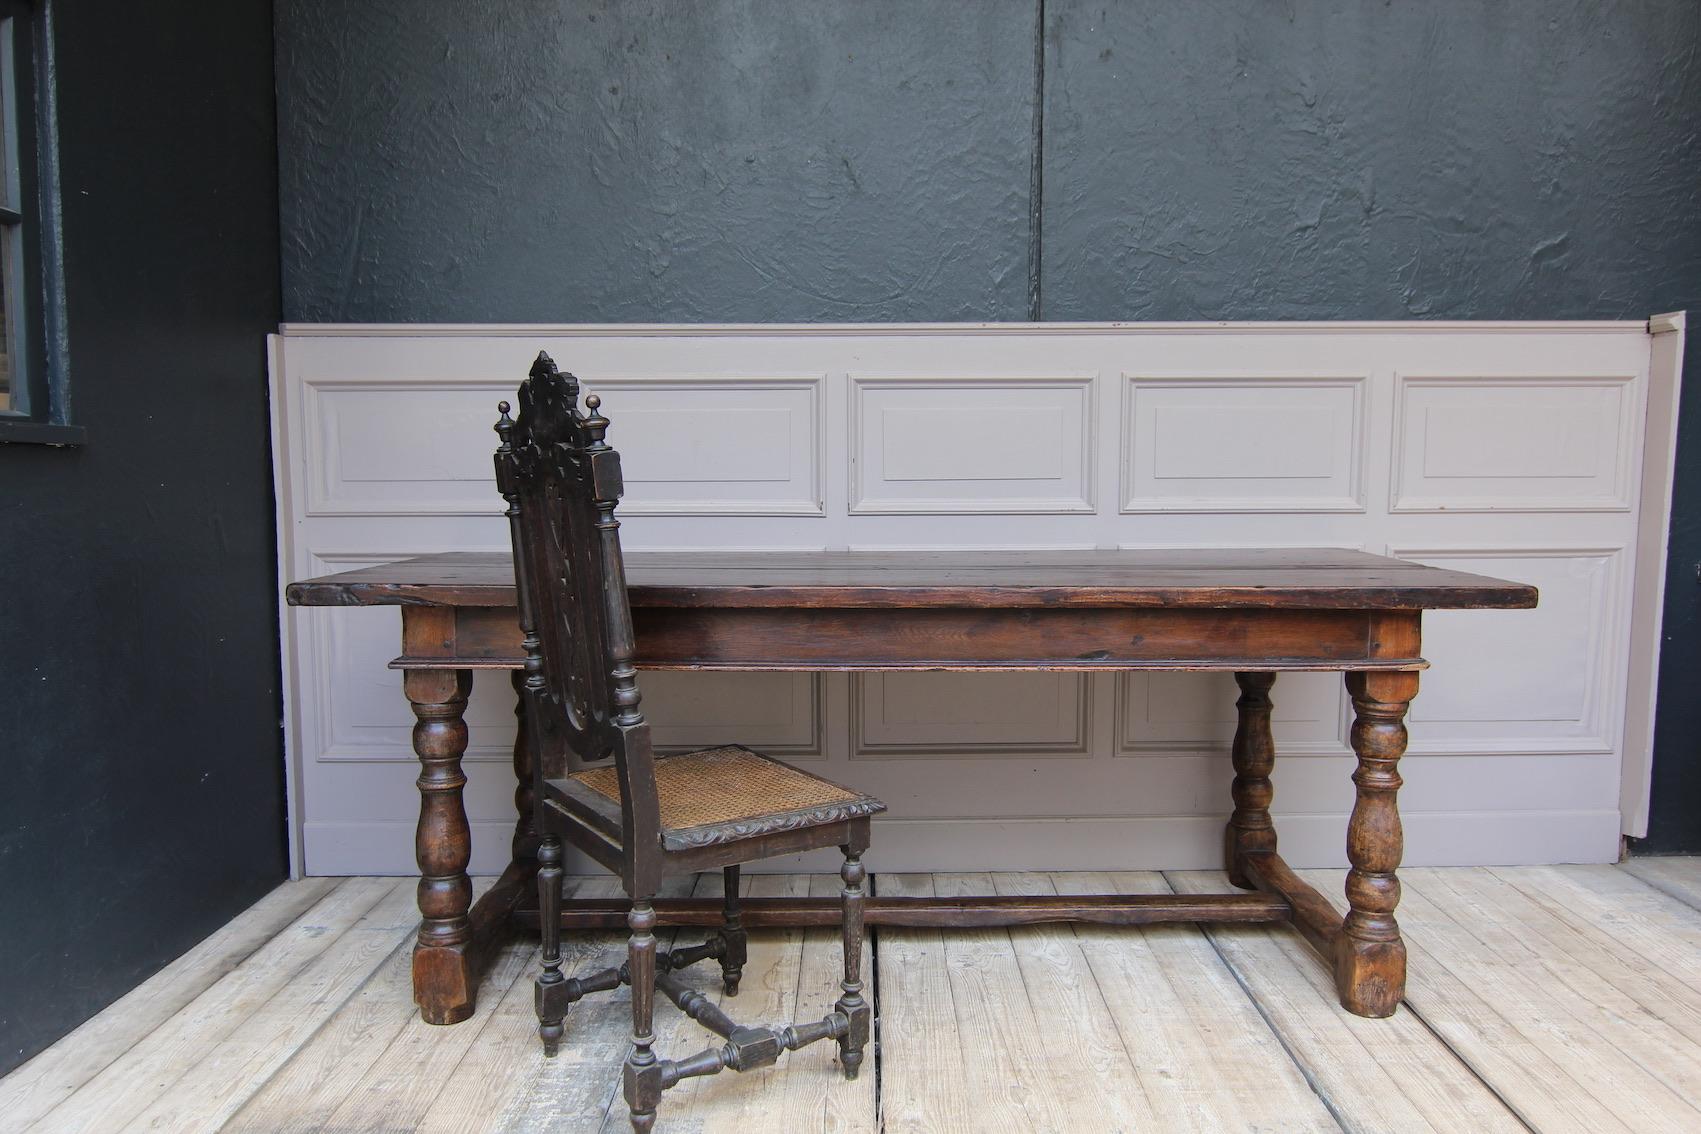 Antique oak refectory table. France, early 19th century.
The waxed surface has a beautiful patina from the old oak wood.

Dimensions: 
77.5 cm high / 30.5 inch high,
208 cm long / 81.9 inch wide,
81 cm deep / 31.9 inch deep;
Height to the